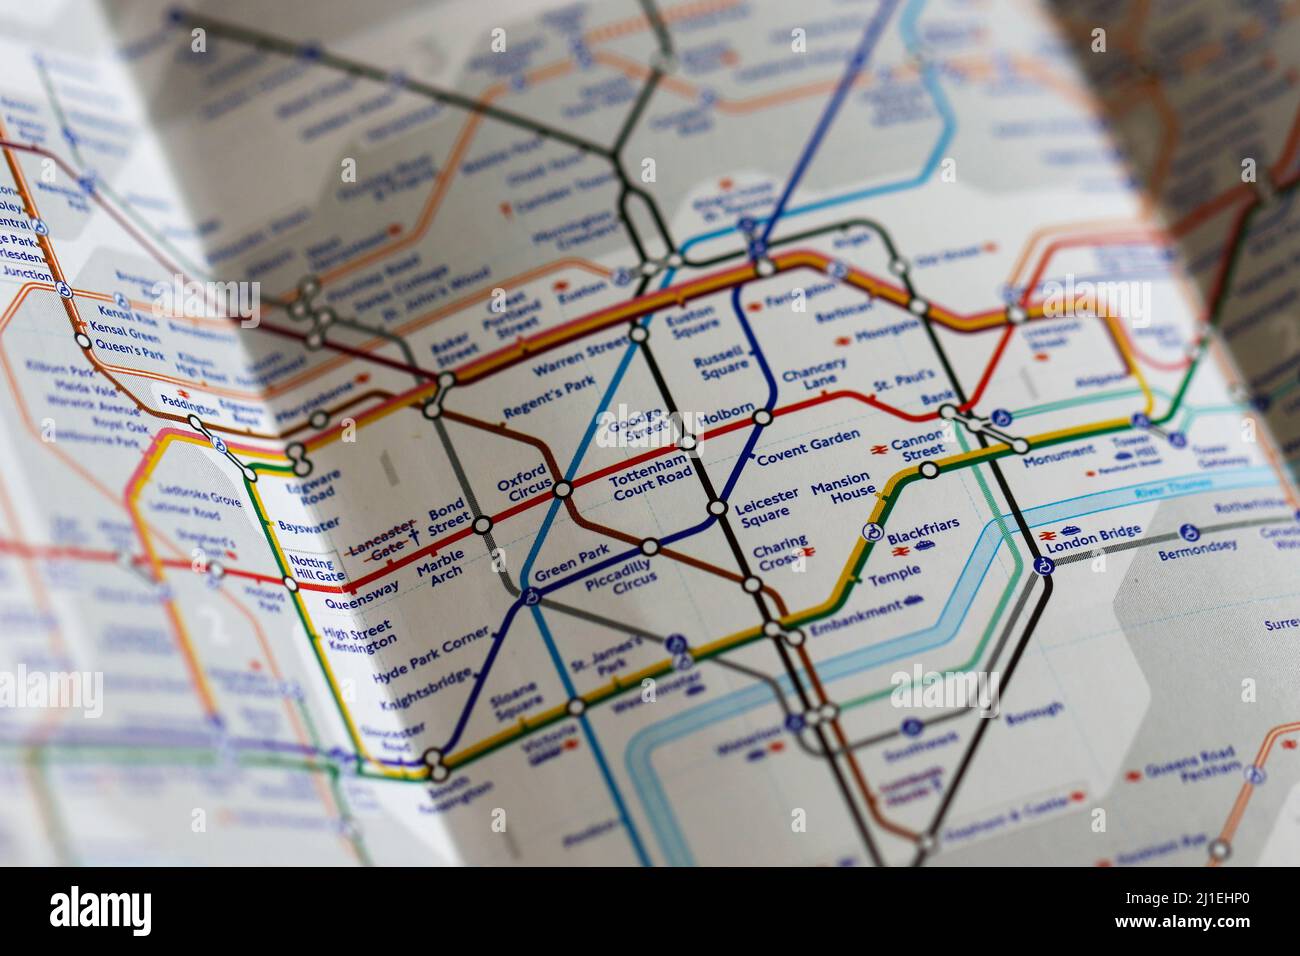 underground tube train map. Focus on Red Line Oxford Circus station stop. Signage for transport in England's capital city. Britain, UK Stock Photo - Alamy